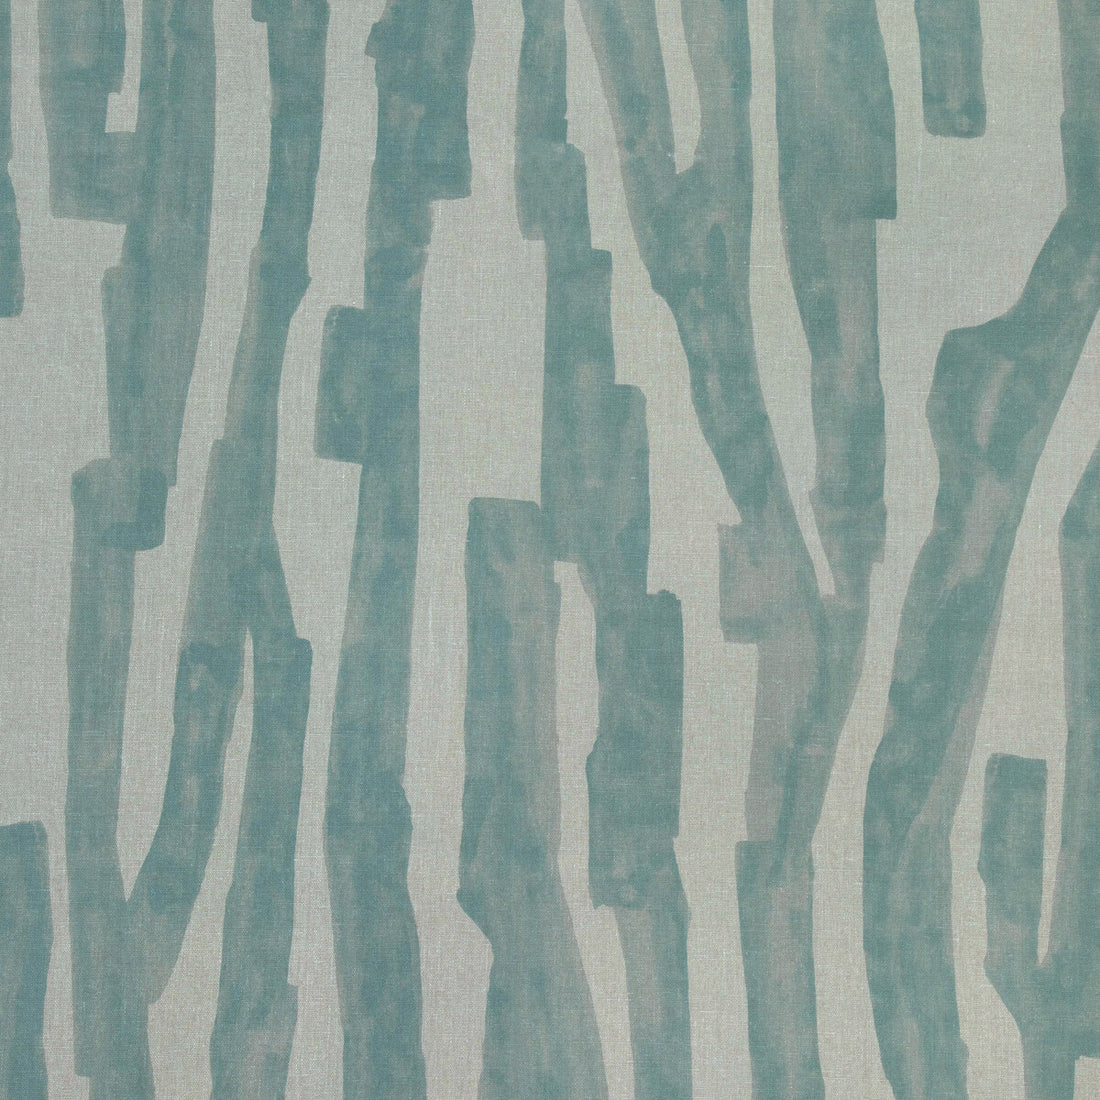 Intargia fabric in aquamarine color - pattern GWF-3790.13.0 - by Lee Jofa Modern in the Kelly Wearstler VII collection